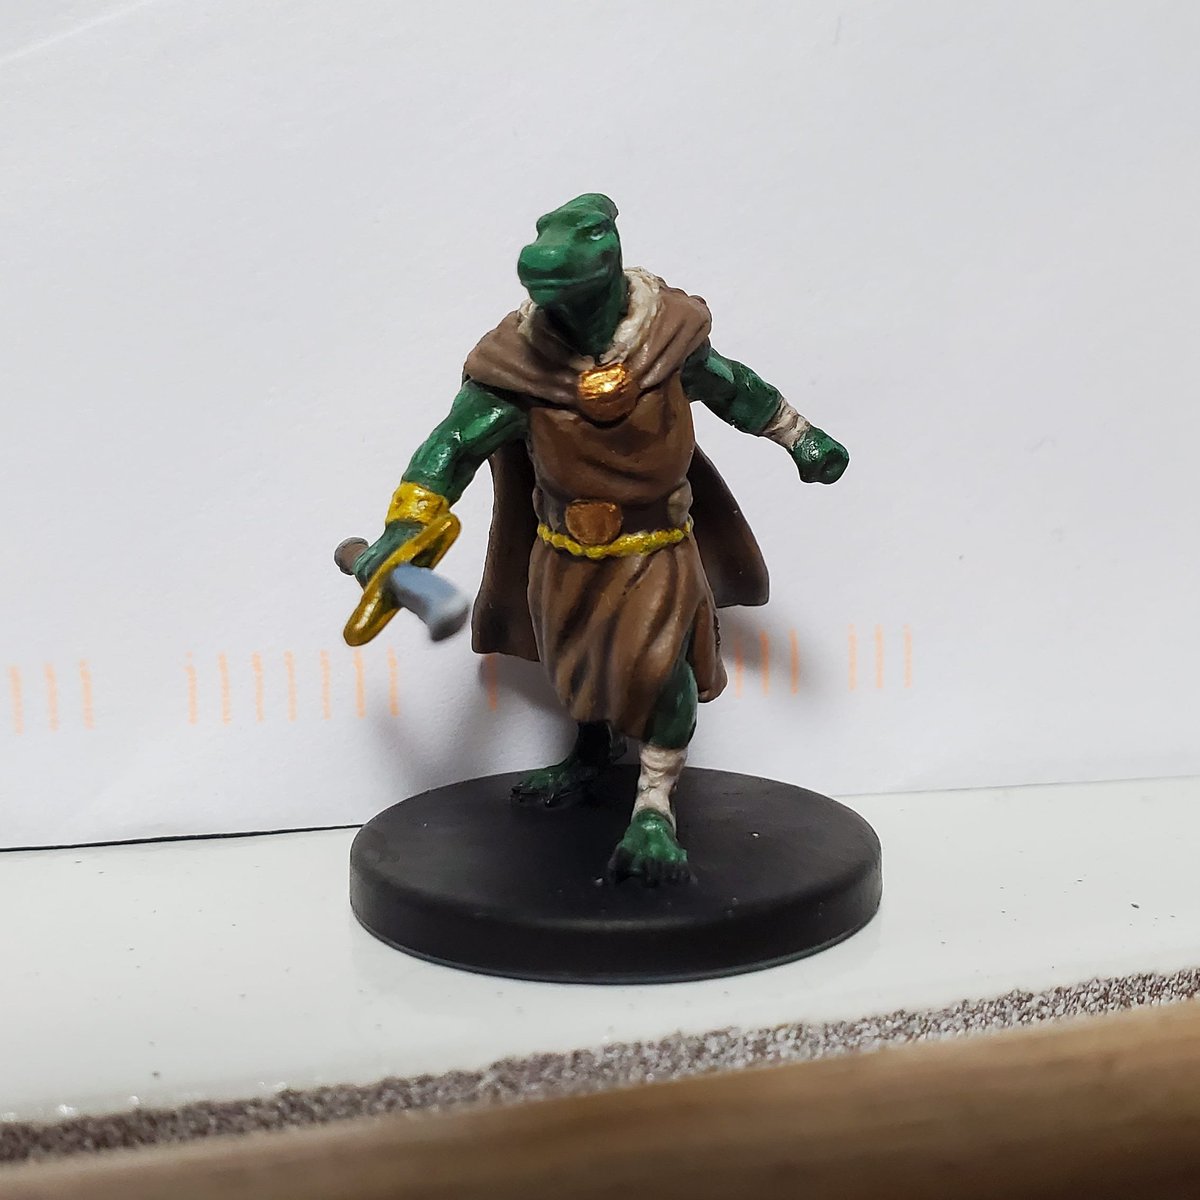 Dragonbait mini from the Temple of Elemental Evil board game. #boardgames #games #gaming #tabletopgames #tabletopgaming #clubfantasci #thelowryagency #davidlowry #rpg #roleplayinggames #dungeonsanddragons #miniatures #miniaturepainting #dragonbait #templeofelementalevil